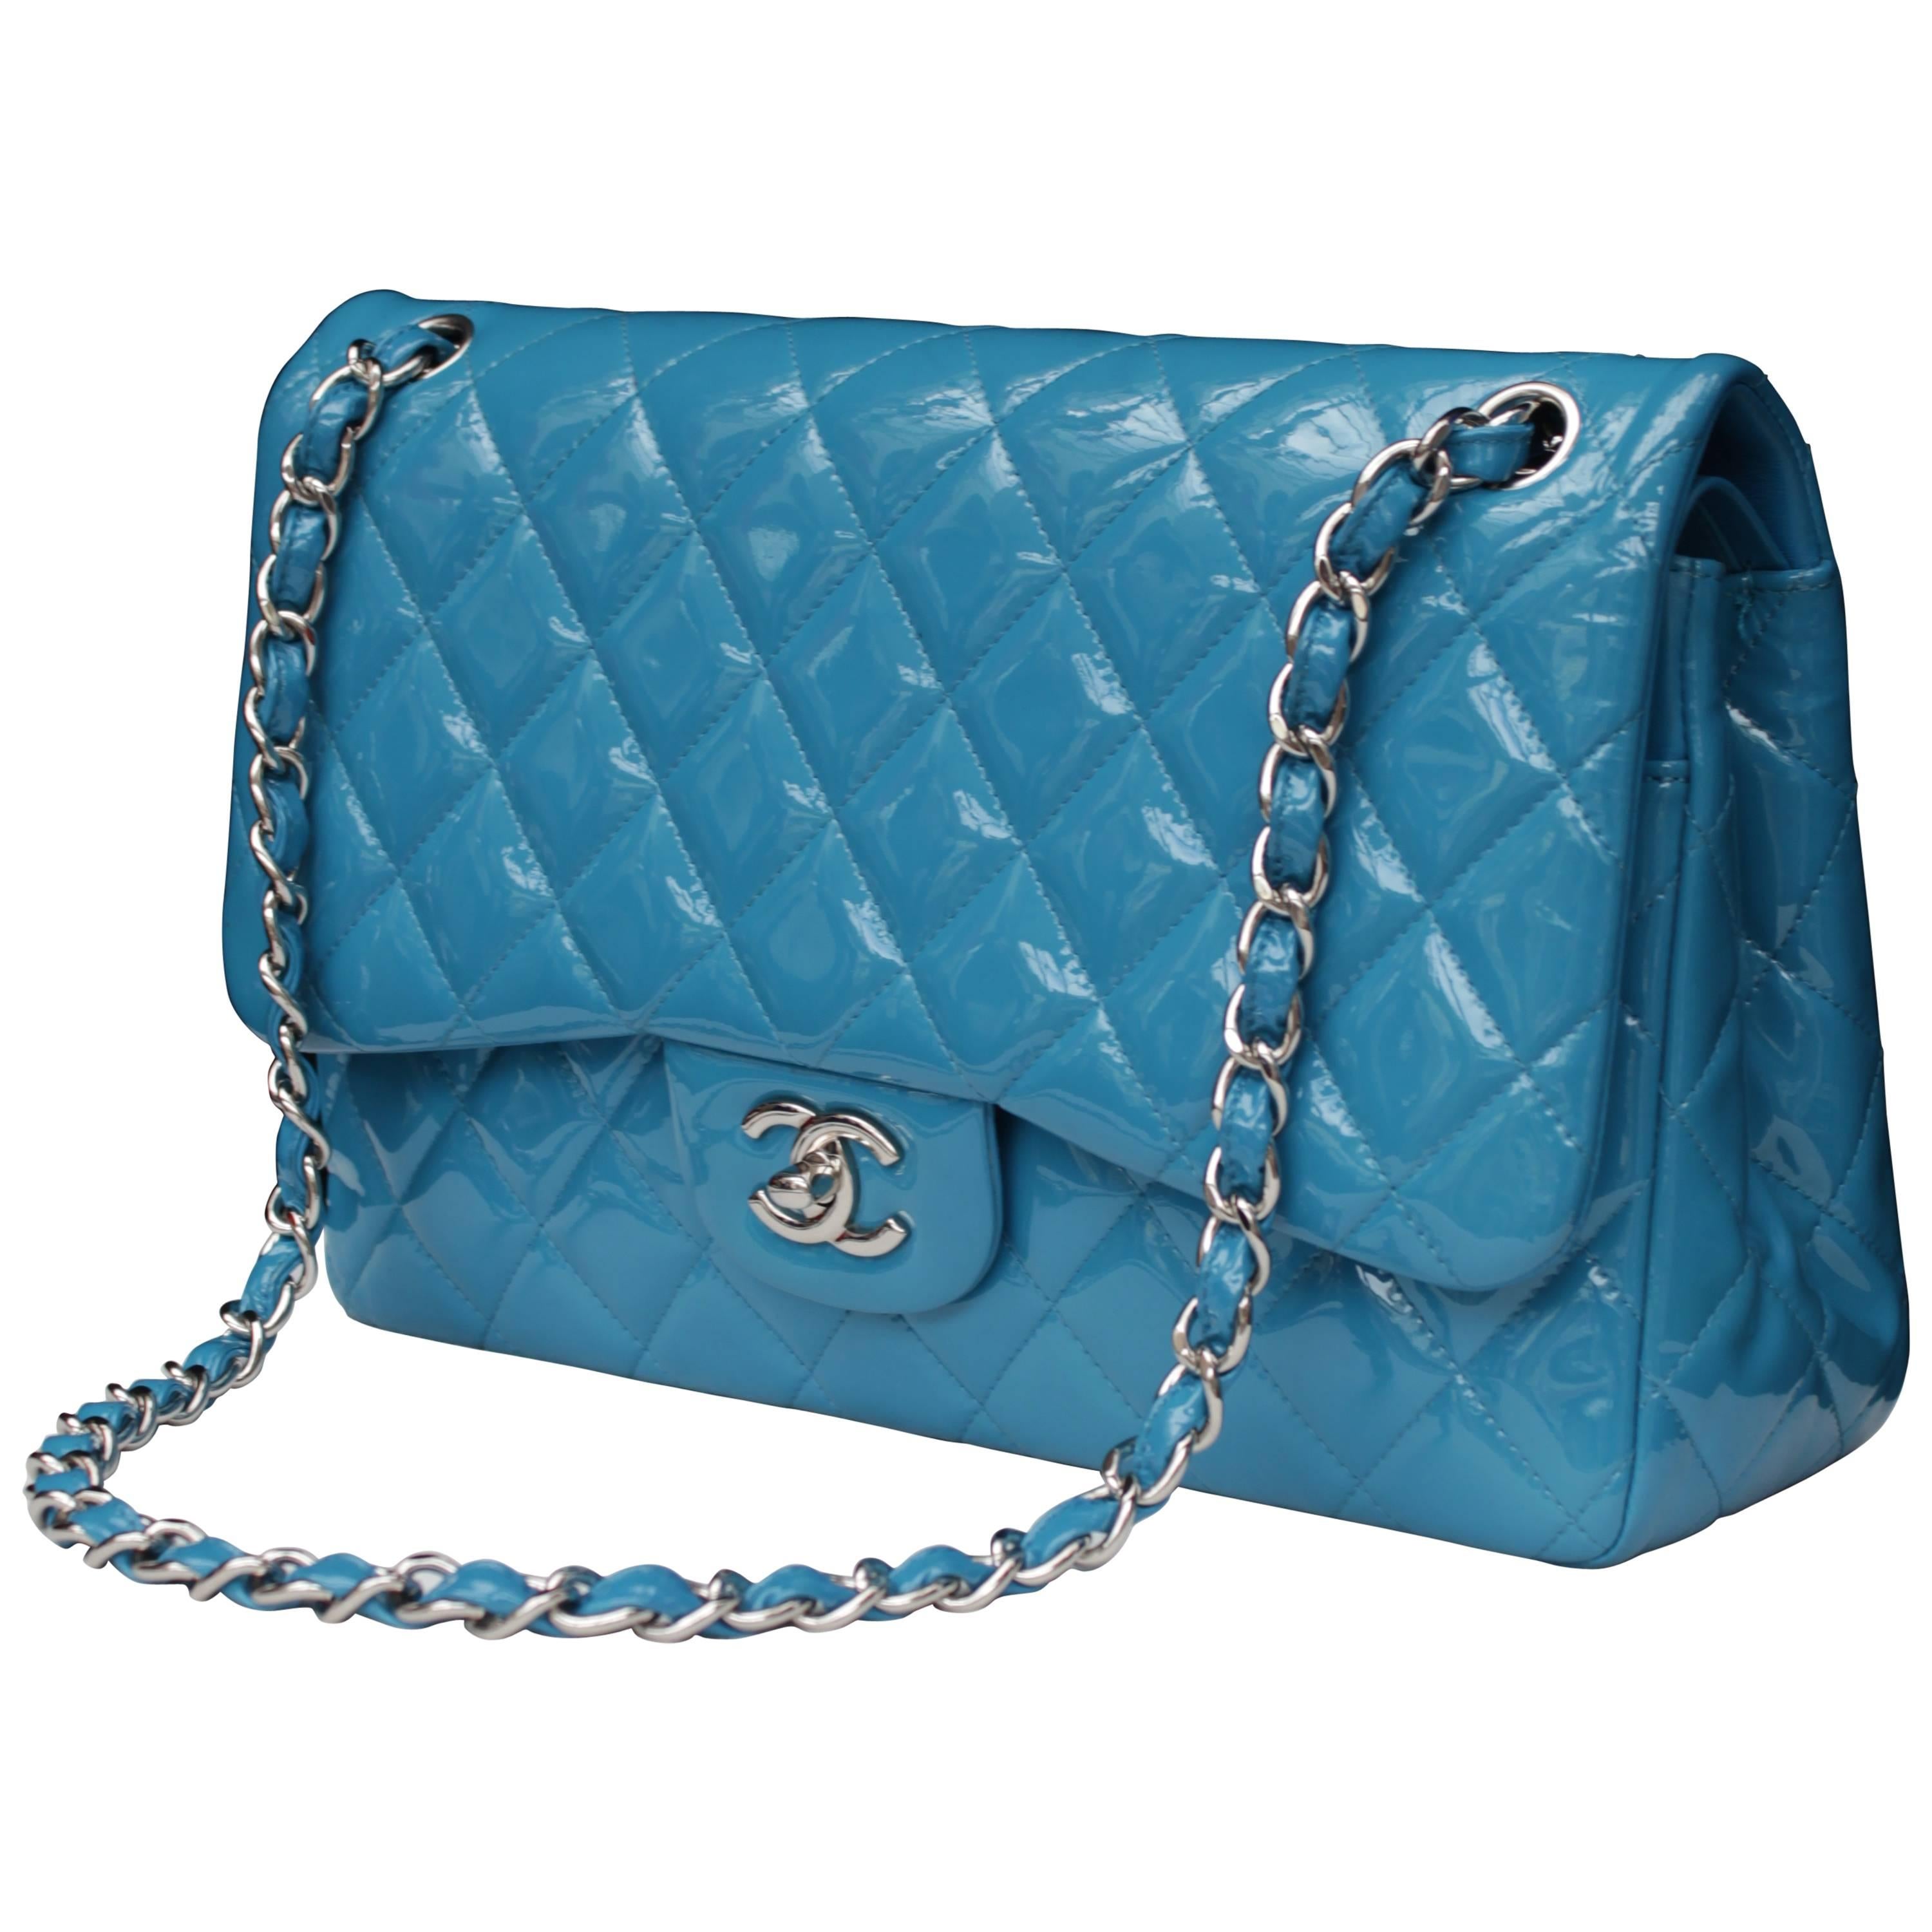 2000s Chanel Jumbo Timeless Bag in Patent Turquoise Leather and Silver Hardware